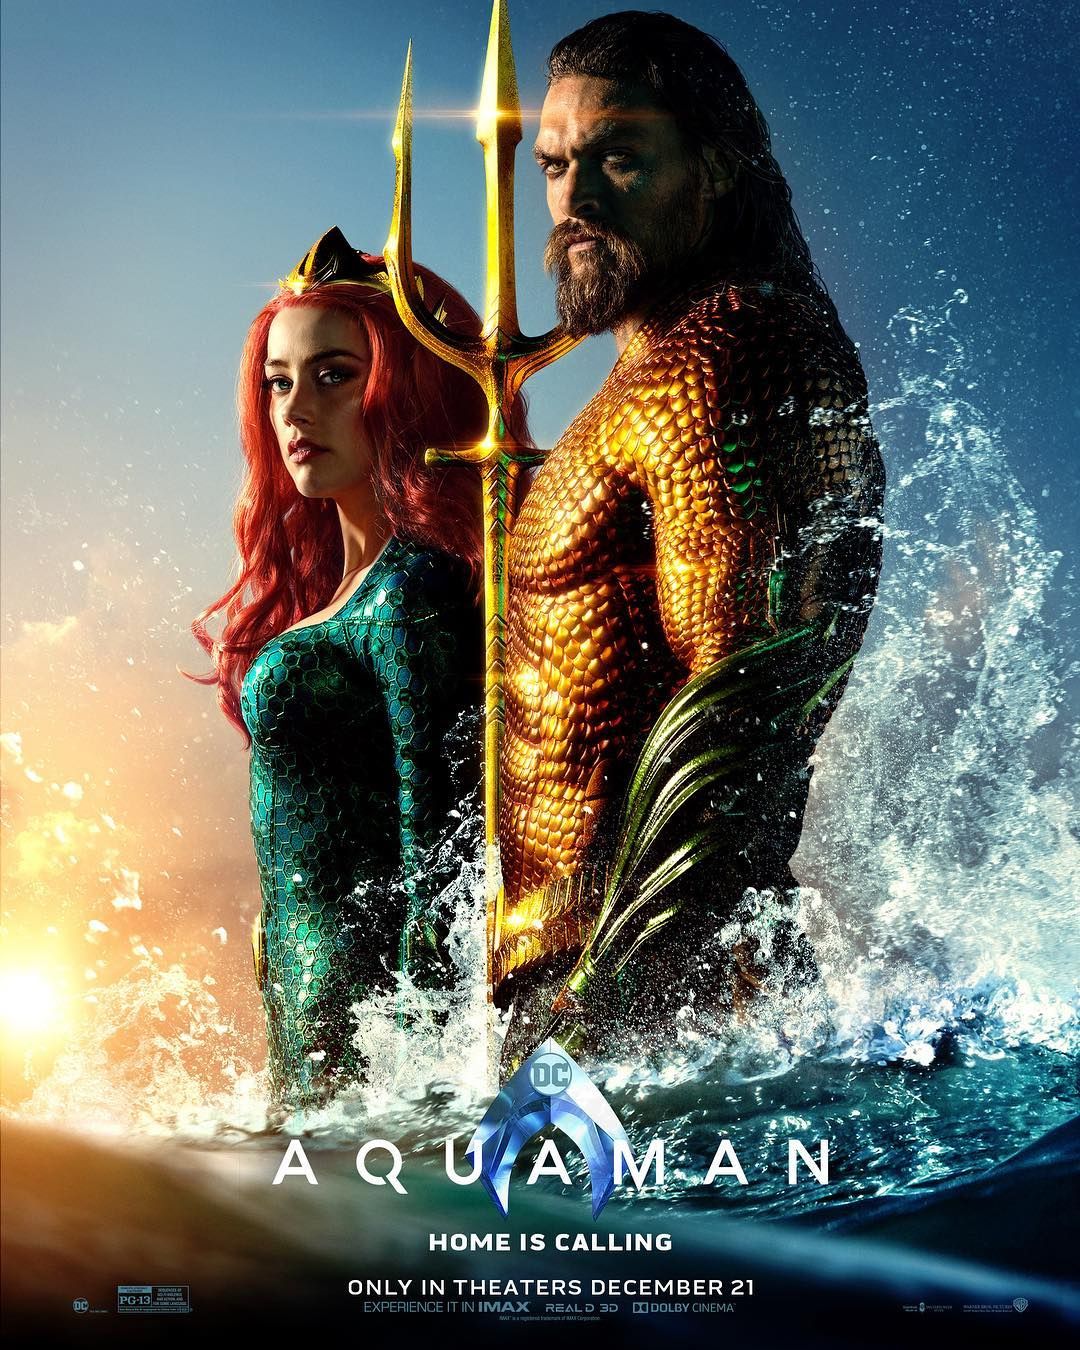 Aquaman (2018) Poster: DC extended universe photo